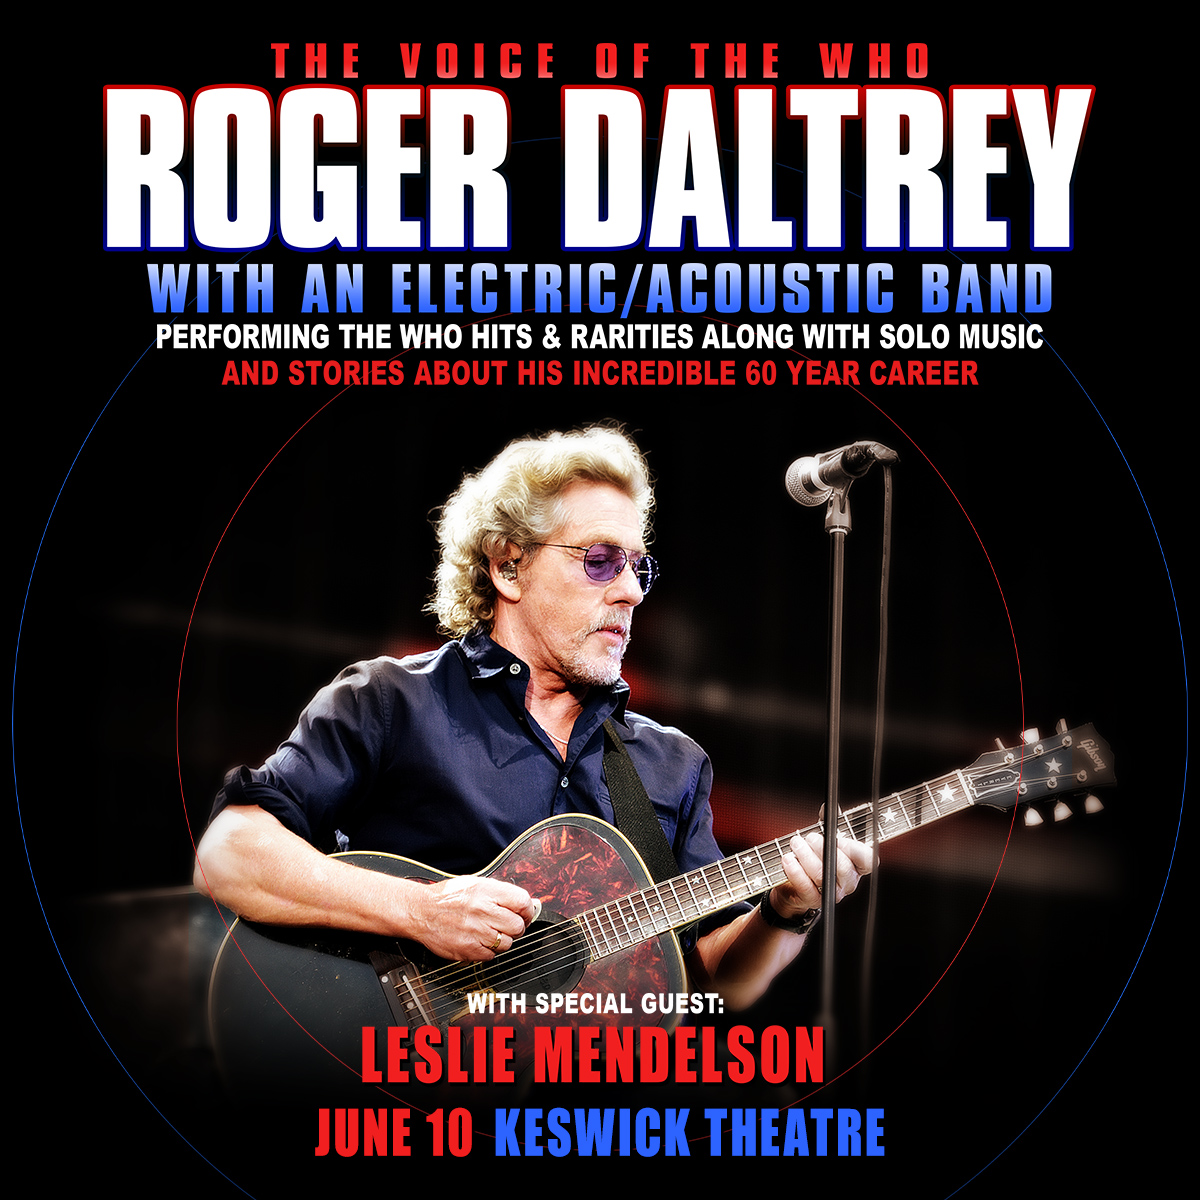 HEADS UP! Limited tickets for Roger Daltrey at Keswick Theatre have just been released! Get them while you can. They won't last long!